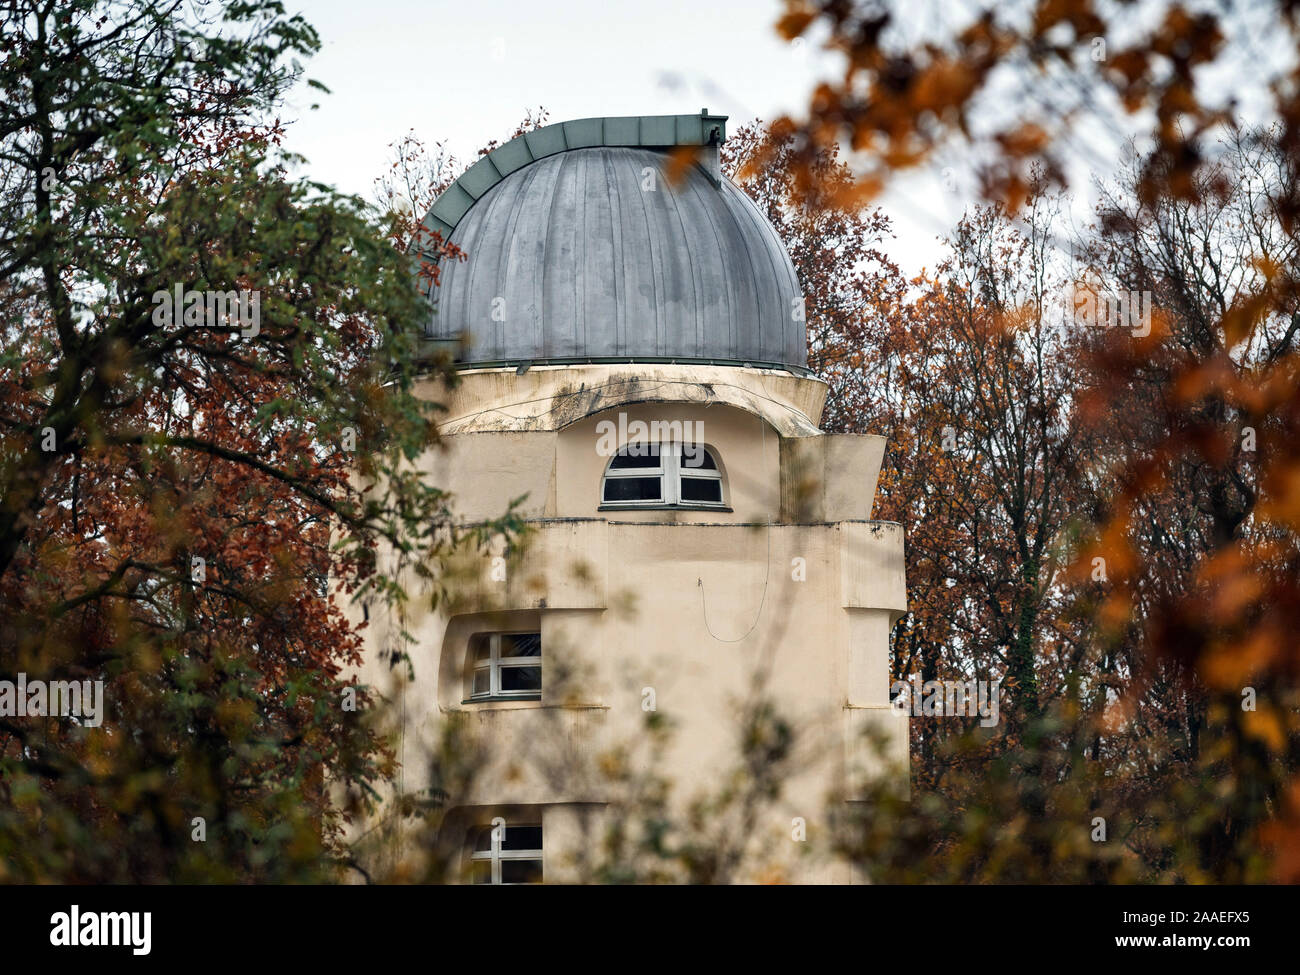 Potsdam, Germany. 18th Nov, 2019. The Einstein Tower, designed by Erich Mendelsohn, is set between autumnal leafy trees in the Albert Einstein Science Park. The park was created in the middle of the 19th century with astronomical, meteorological and geoscientific observatories. The architect Paul Spieker was the planner of the park. Credit: Soeren Stache/dpa-Zentralbild/ZB/dpa/Alamy Live News Stock Photo